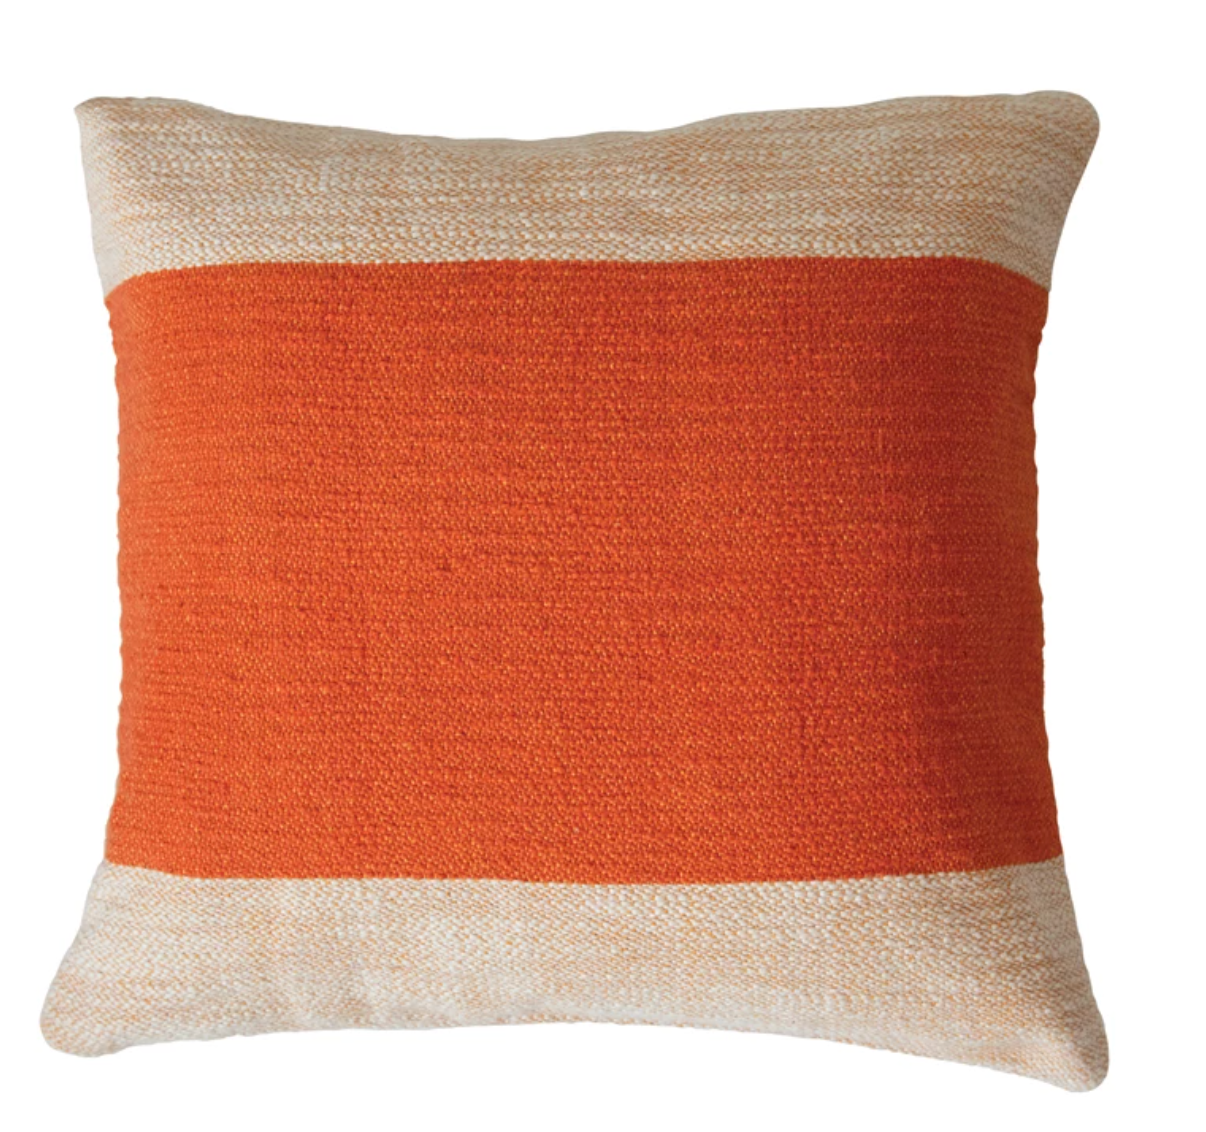 Woven Cotton Pillow with Stripe